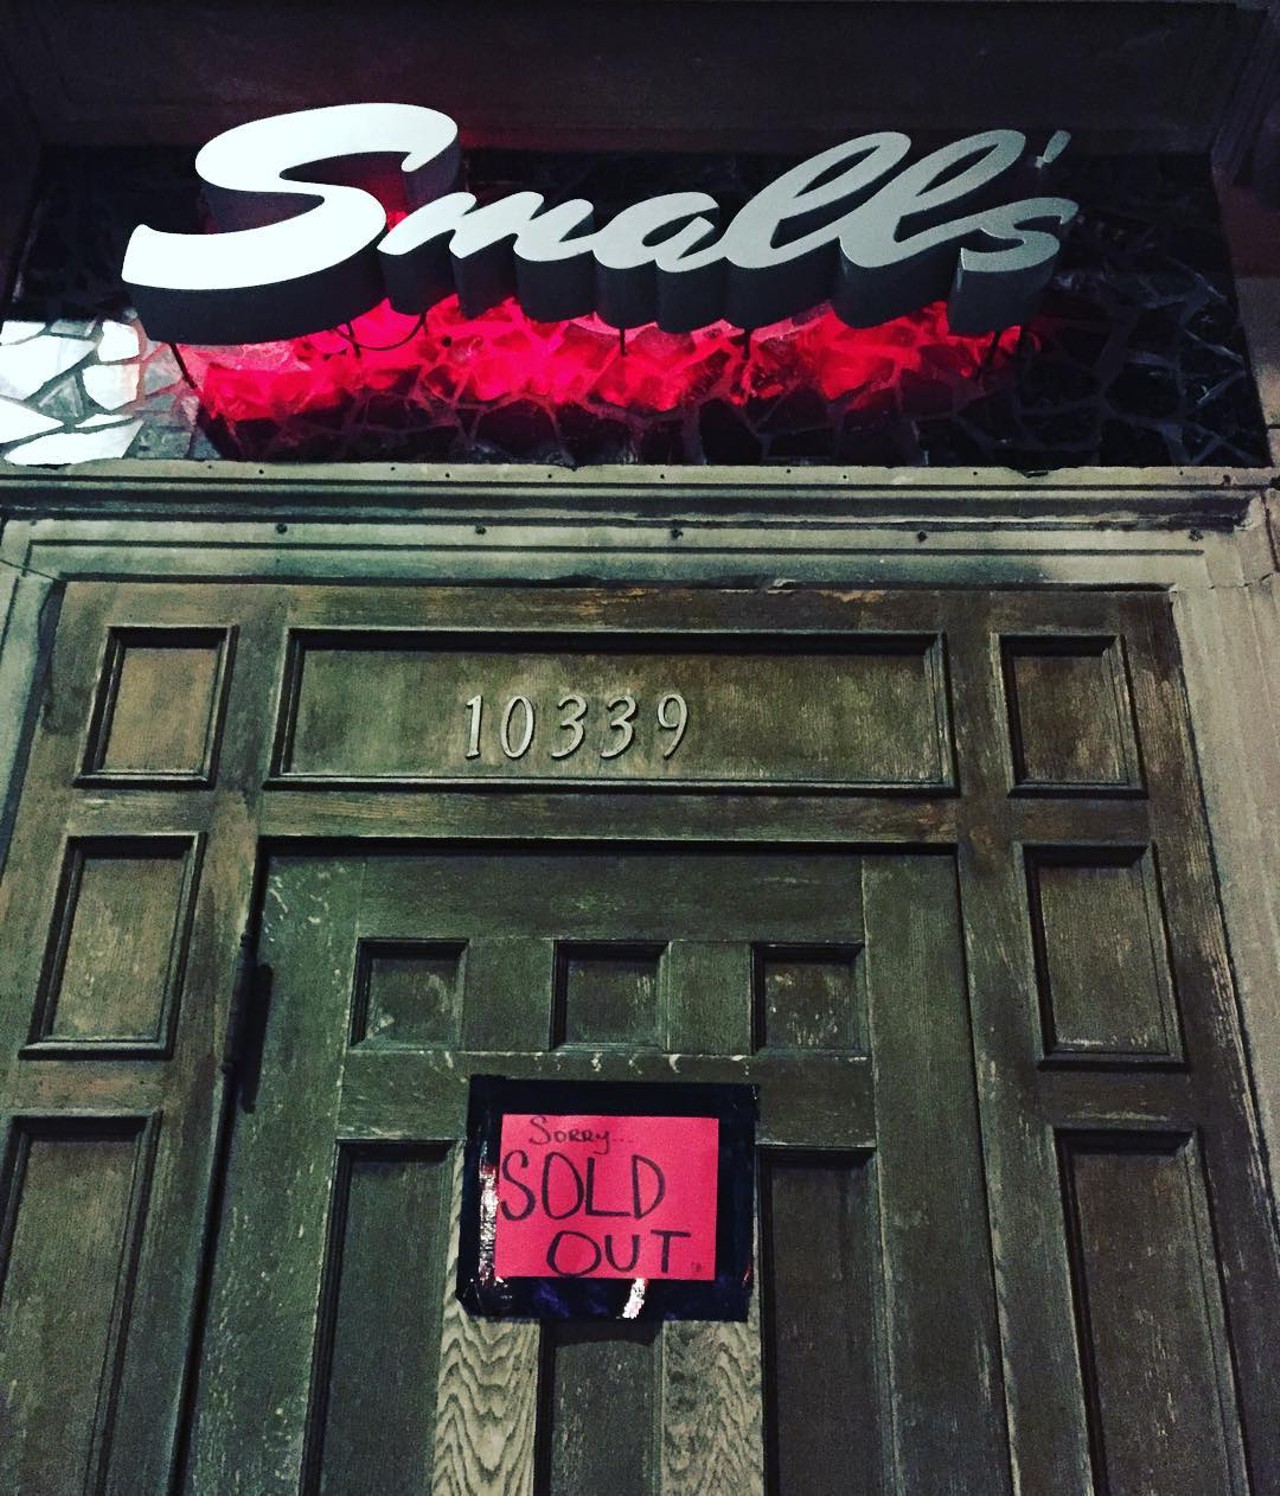 Small&#146;s Bar
10339 Conant St, Hamtramck
(313)-873-1117
With locals bands and comedians always making a stop at Small&#146;s, it&#146;s a great place to be rest assured that politics won&#146;t get mentioned (unless a comedian is doing a bit). 
Photo via IG user @smallsbar